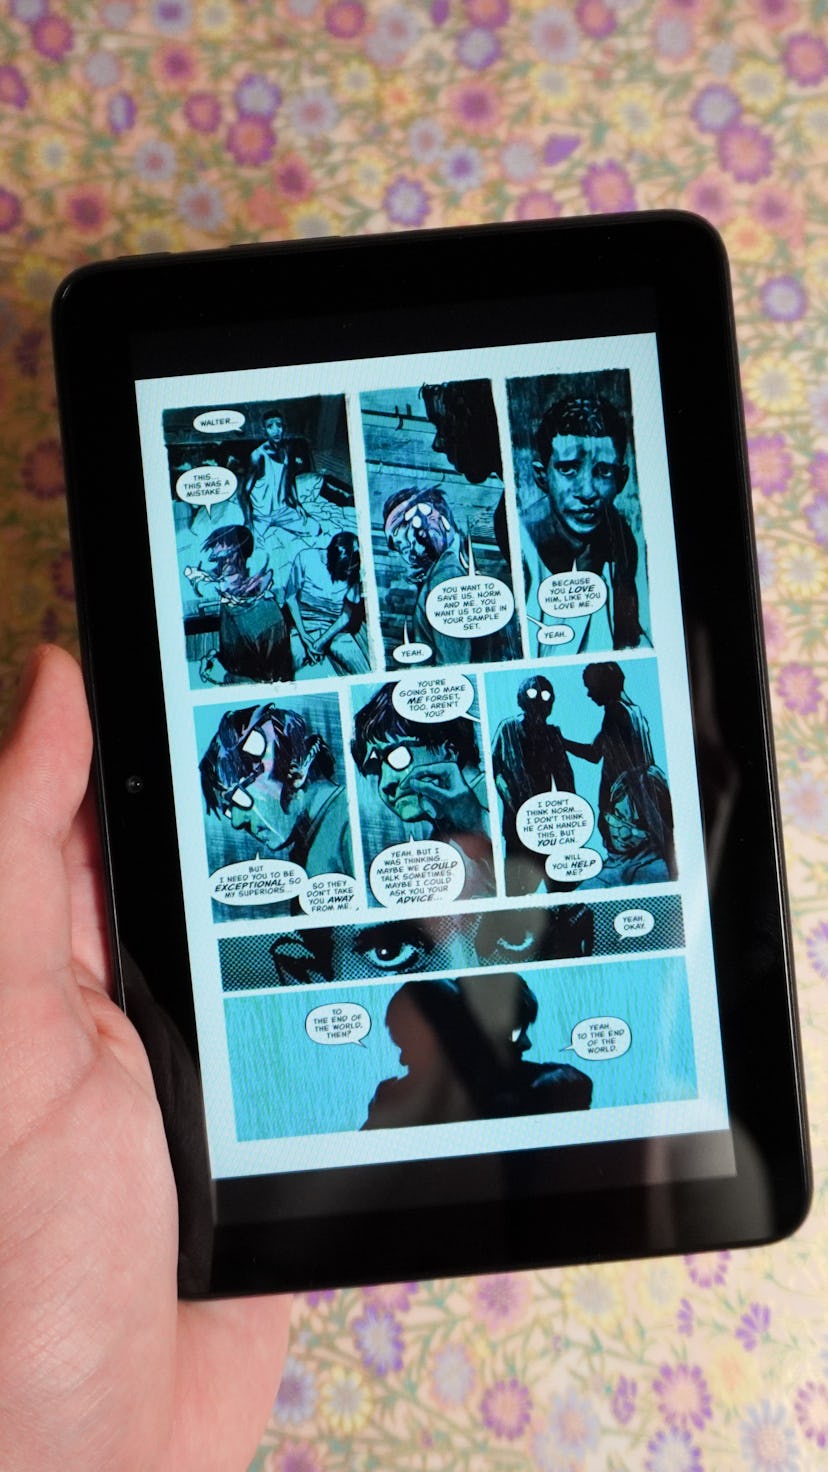 Reading comics on the Fire 7 tablet.